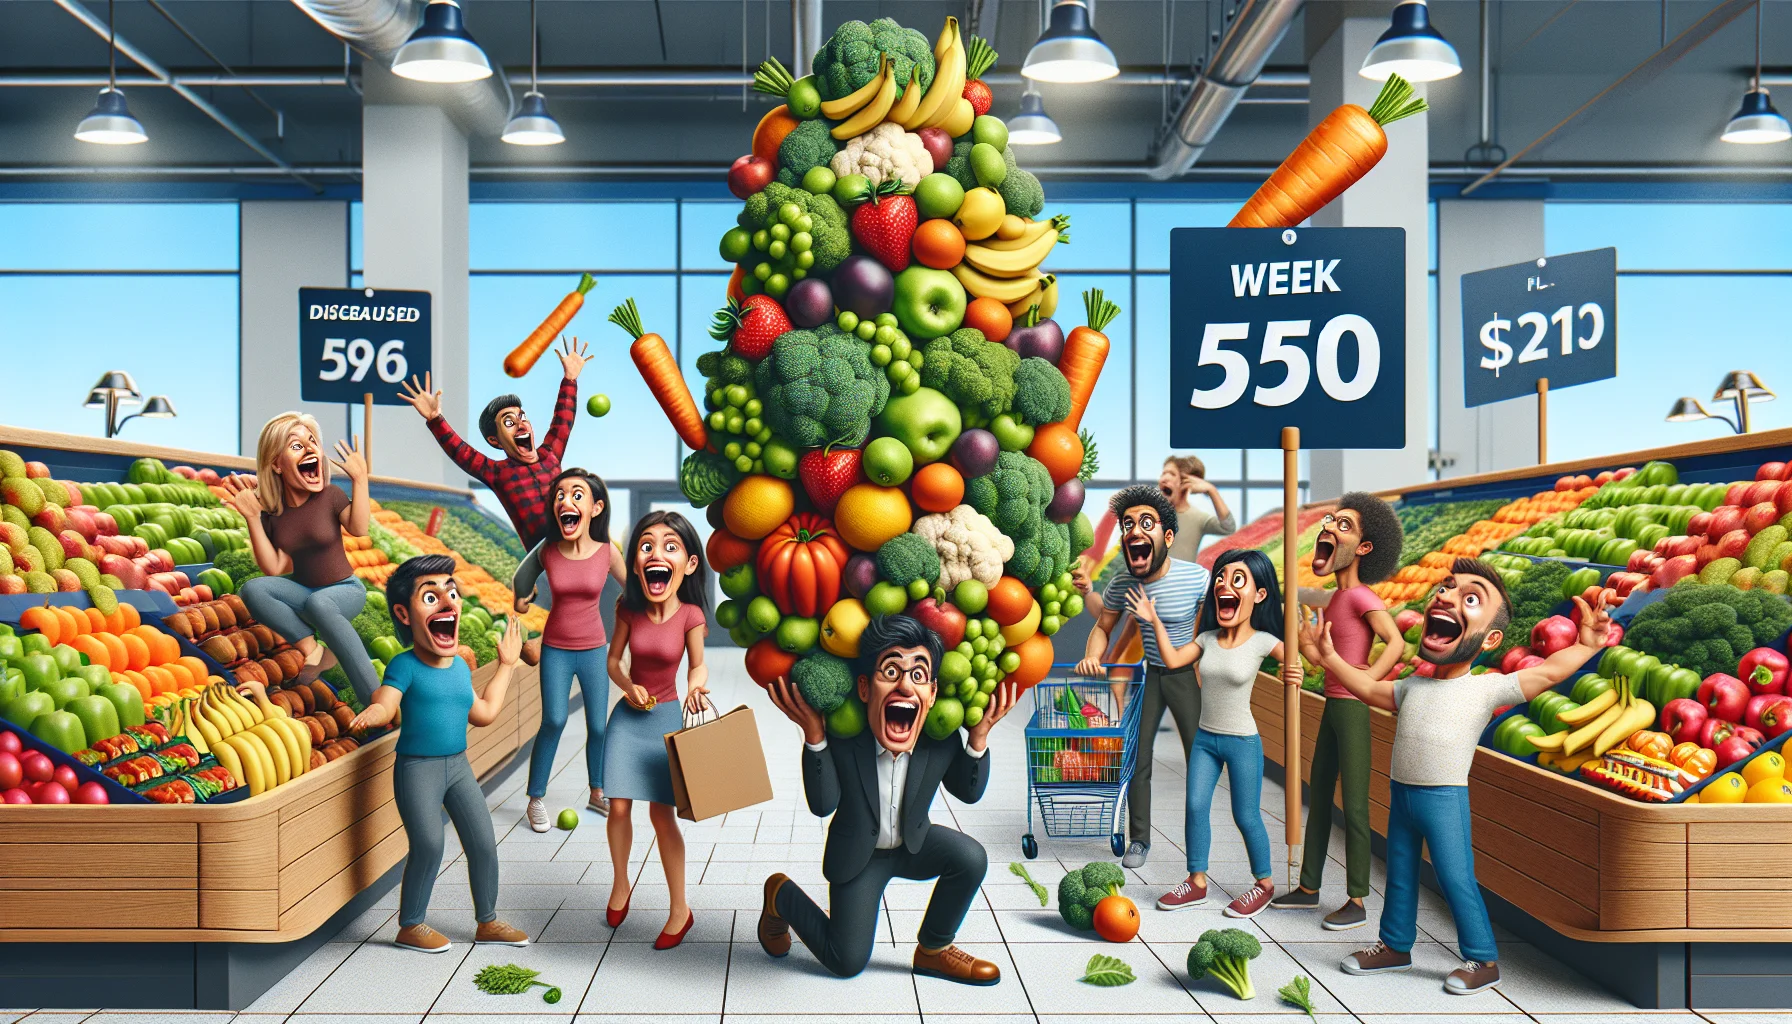 Create a humorous and realistic image signifying 'Week 55: Healthy Wednesday Update'. Visualize a supermarket full of fresh fruits, vegetables, and other healthy foods, with price tags showing surprisingly low prices. Include excited shoppers of different descents and genders, all showing enthusiasm about the affordable healthy food choices. Have fun with the humor - perhaps a man trying to balance a towering pile of fruits in his arms, a woman astounded by the size of a giant carrot, or a child gobbling up a discounted broccoli as if it was candy.